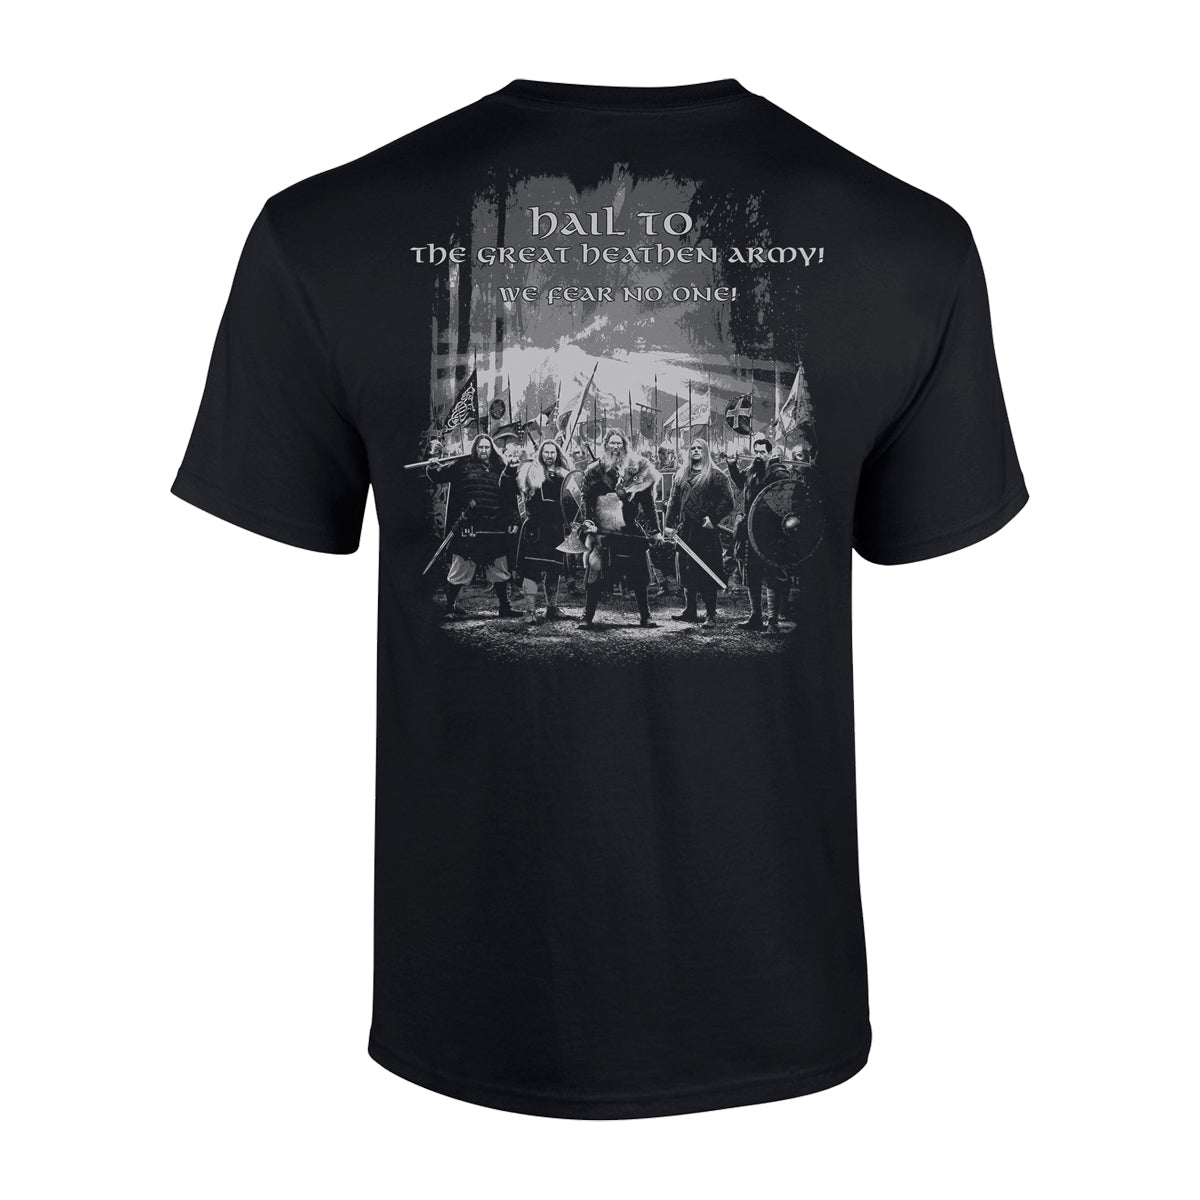 The Great Heathen Army Greyscale T-Shirt